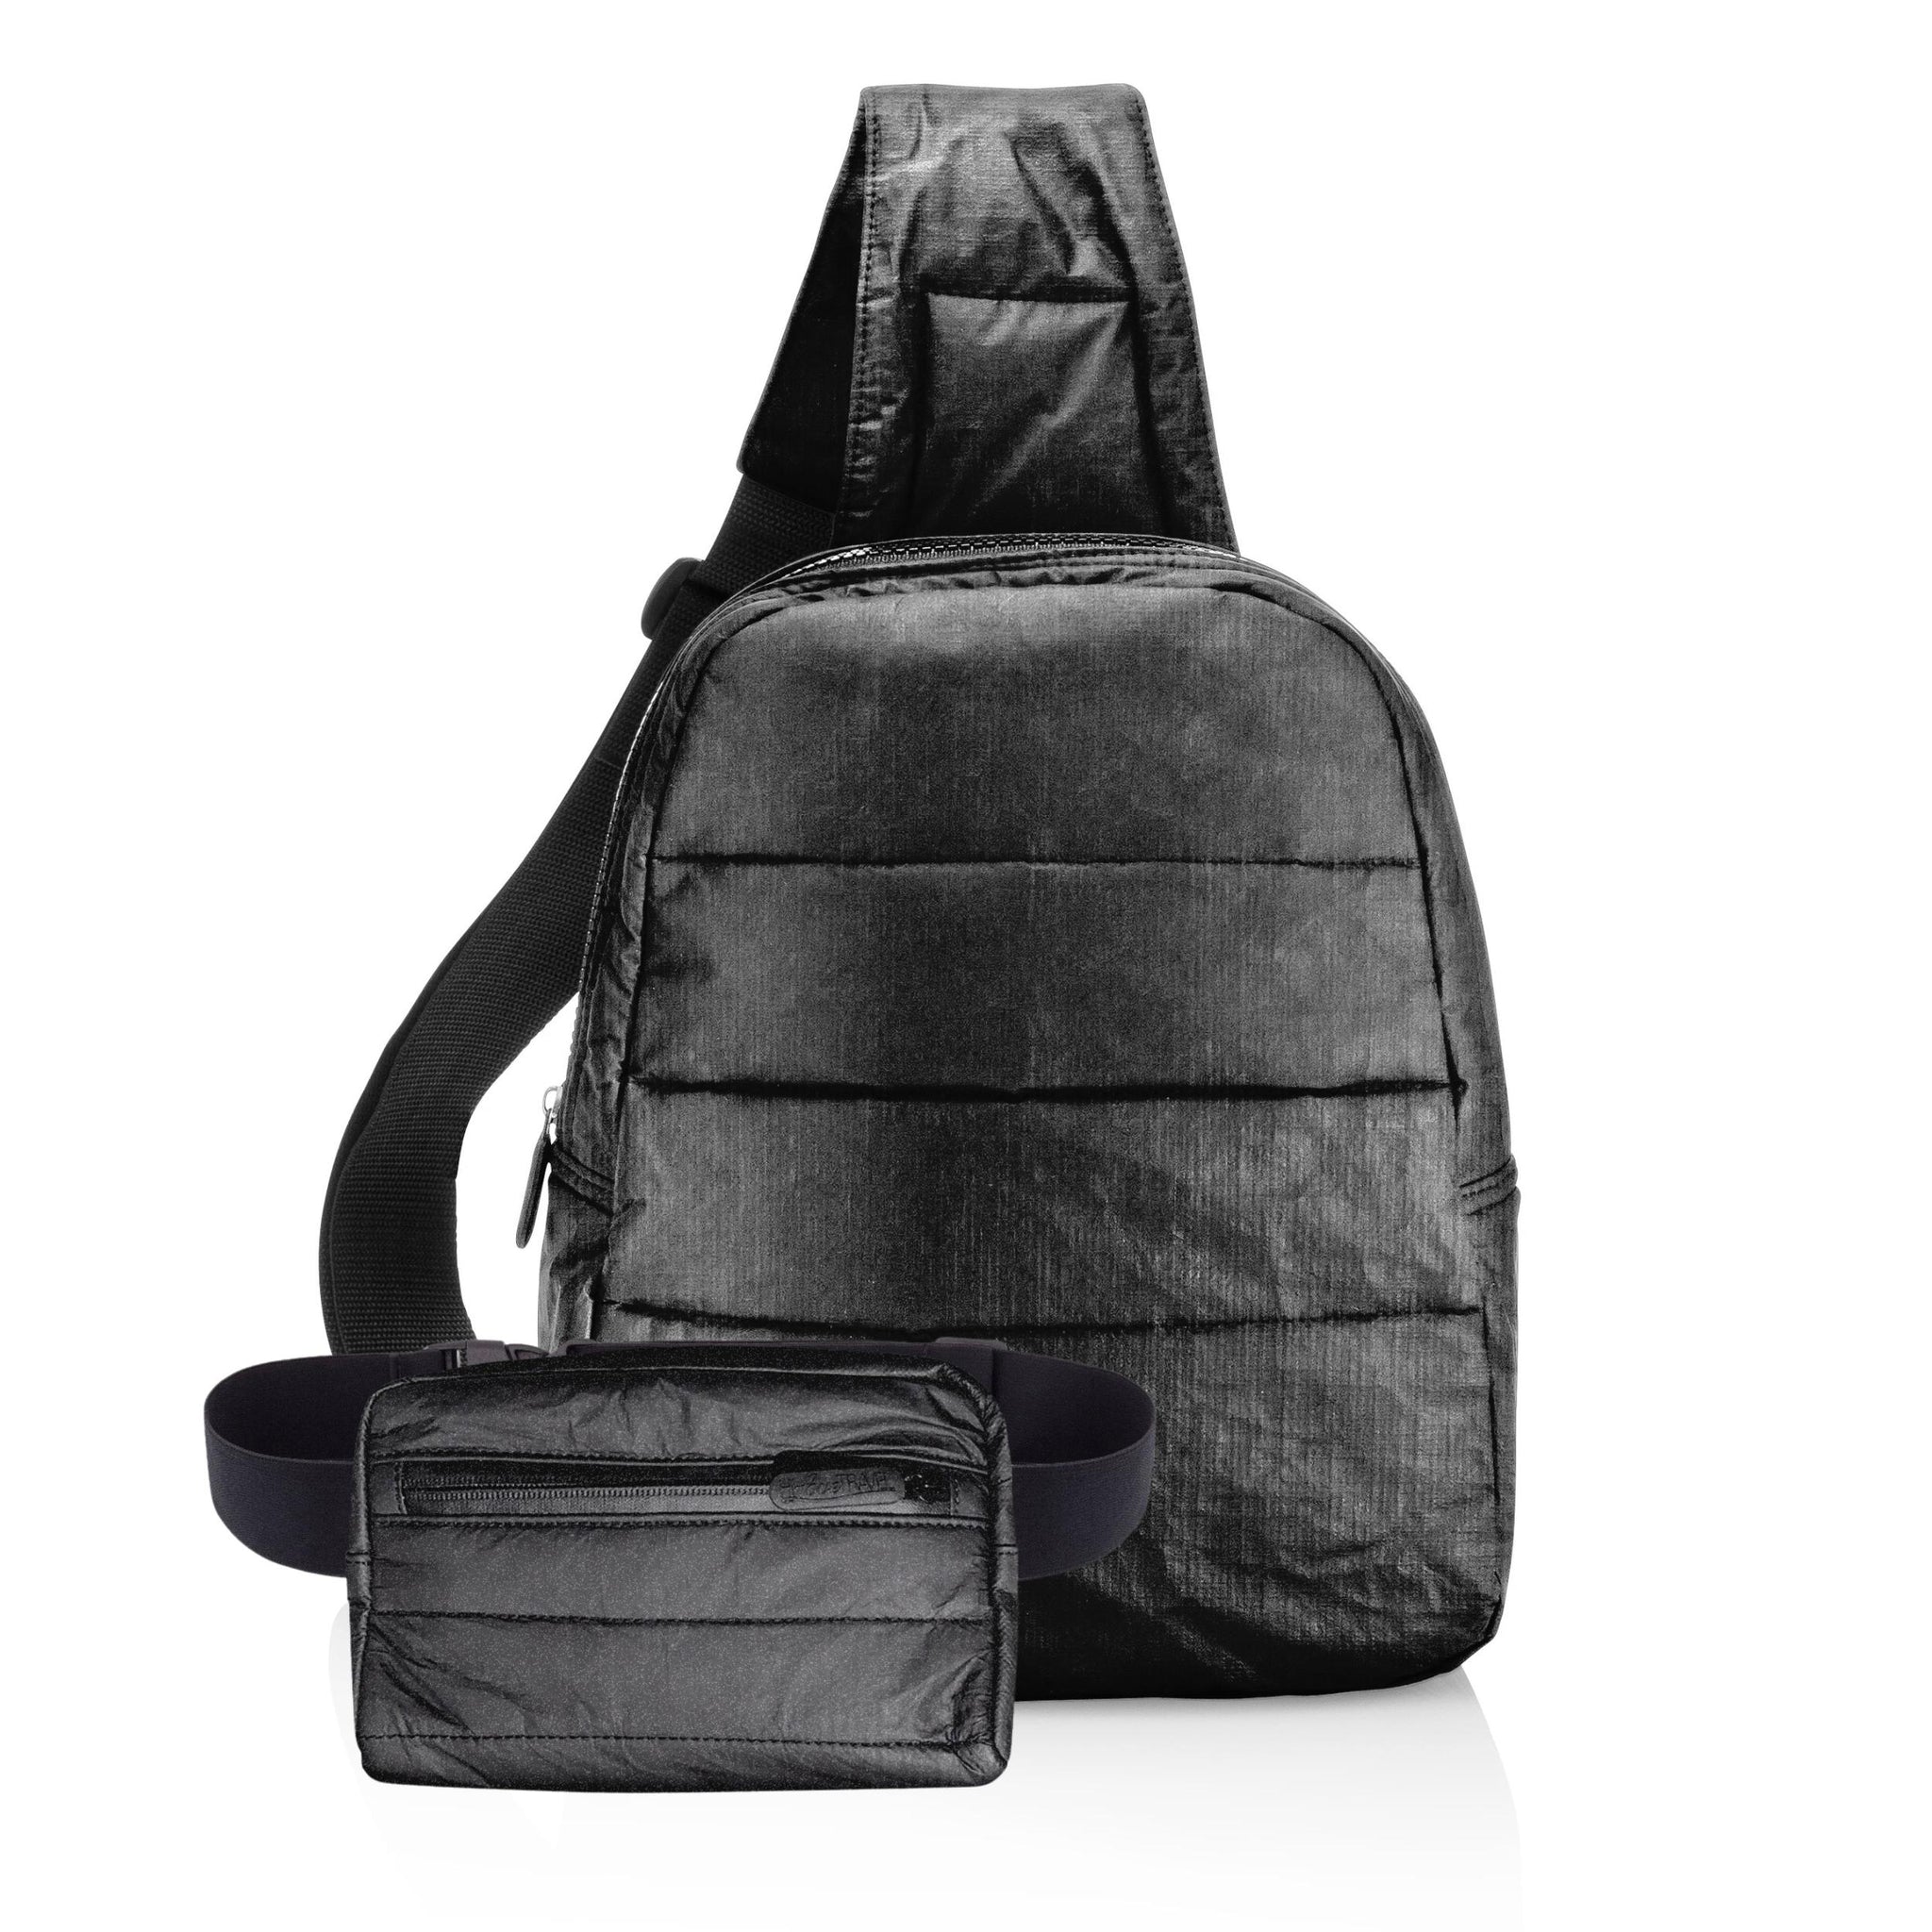 Puffer crossbody backpack and puffer fanny pack in shimmer black